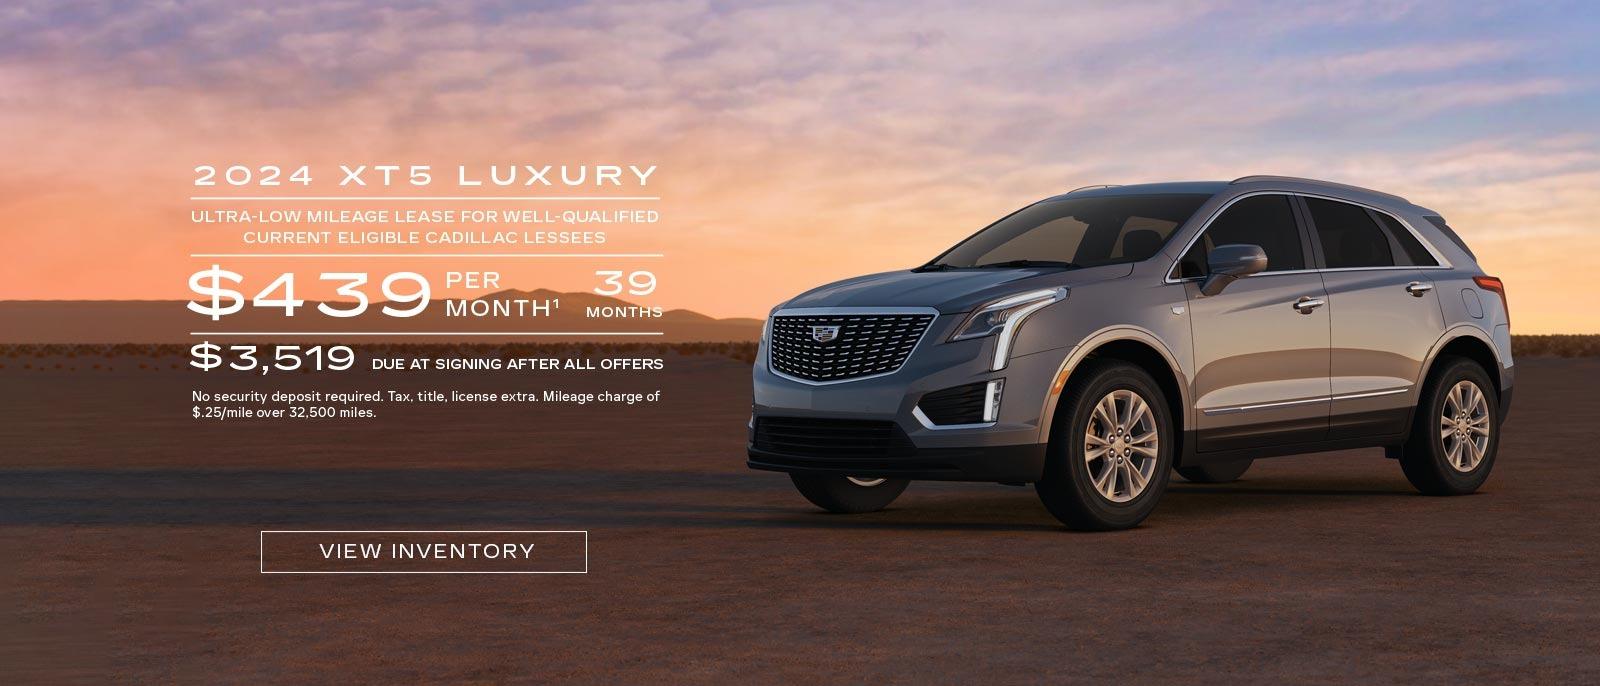 2024 XT5 LUXURY ULTRA-LOW MILEAGE LEASE FOR WELL-QUALIFIED CURRENT ELIGIBLE CADILLAC LESSEES $439 PER   MONTH¹ 39 MONTHS $3,519 DUE AT SIGNING AFTER ALL OFFERS No security deposit required. Tax, title, license extra. Mileage charge of $.25/mile over 32,500 miles.